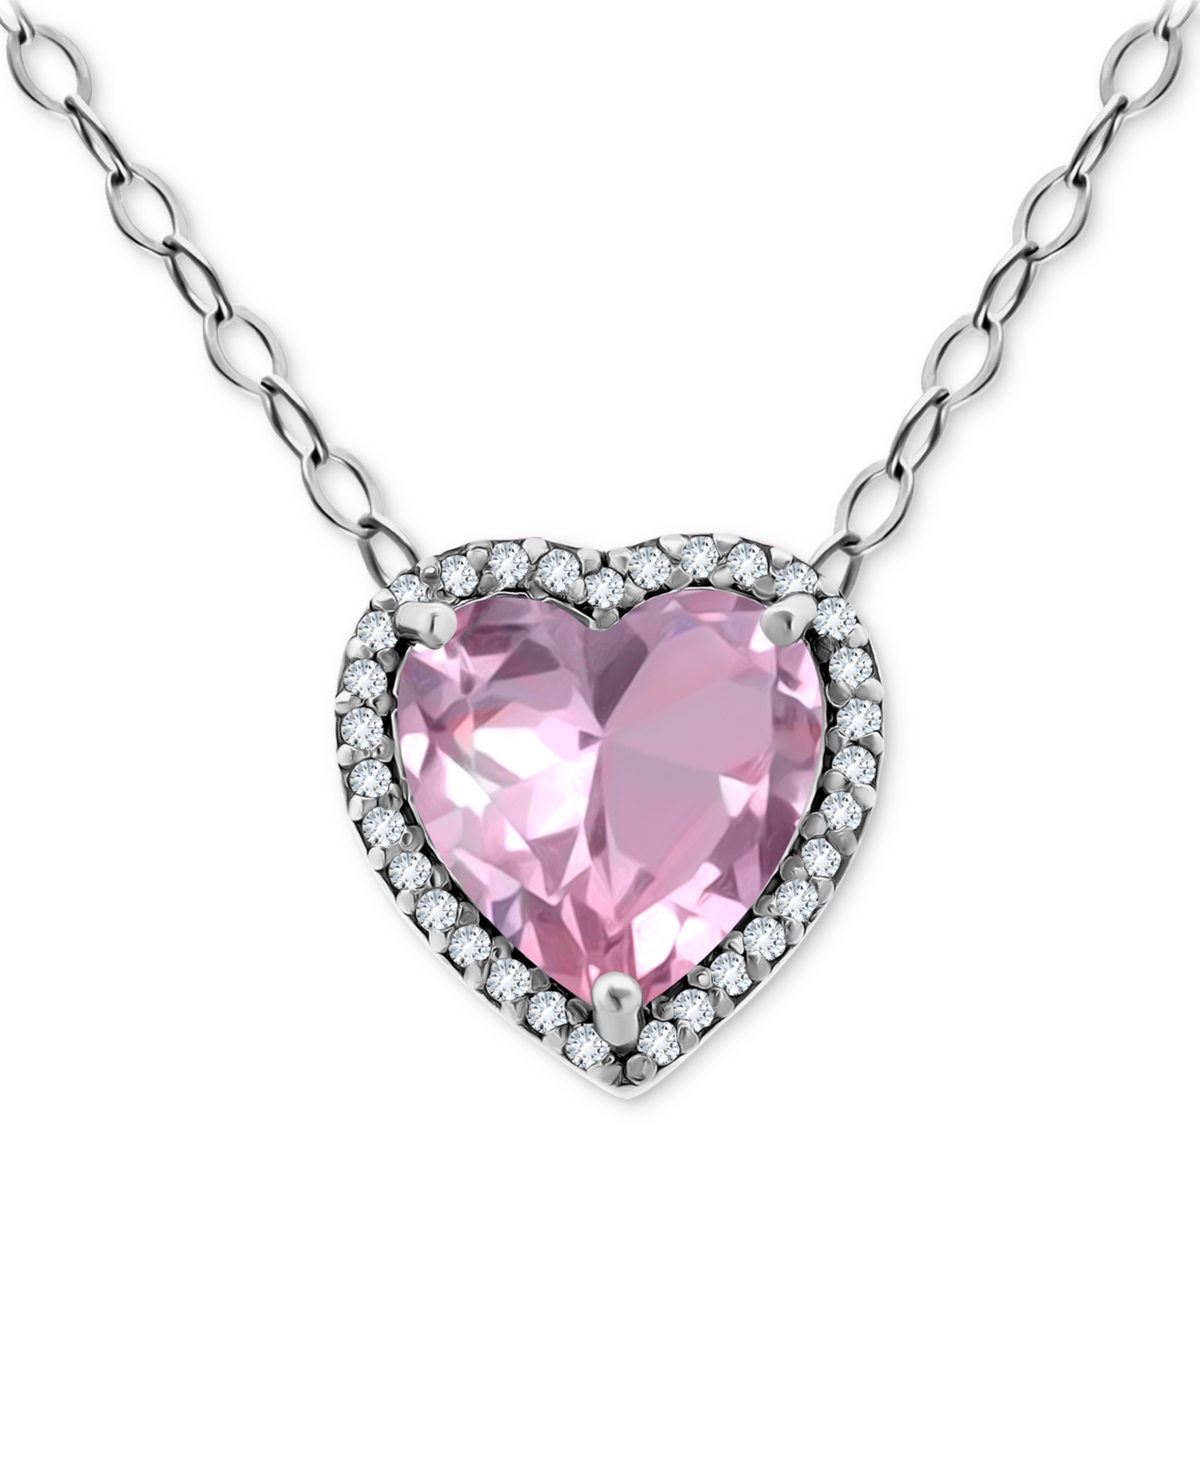 Giani Bernini Cubic Zirconia Heart Halo Pendant Necklace In Sterling Silver, 16" + 2" Extender, Created For Macy's In Pink